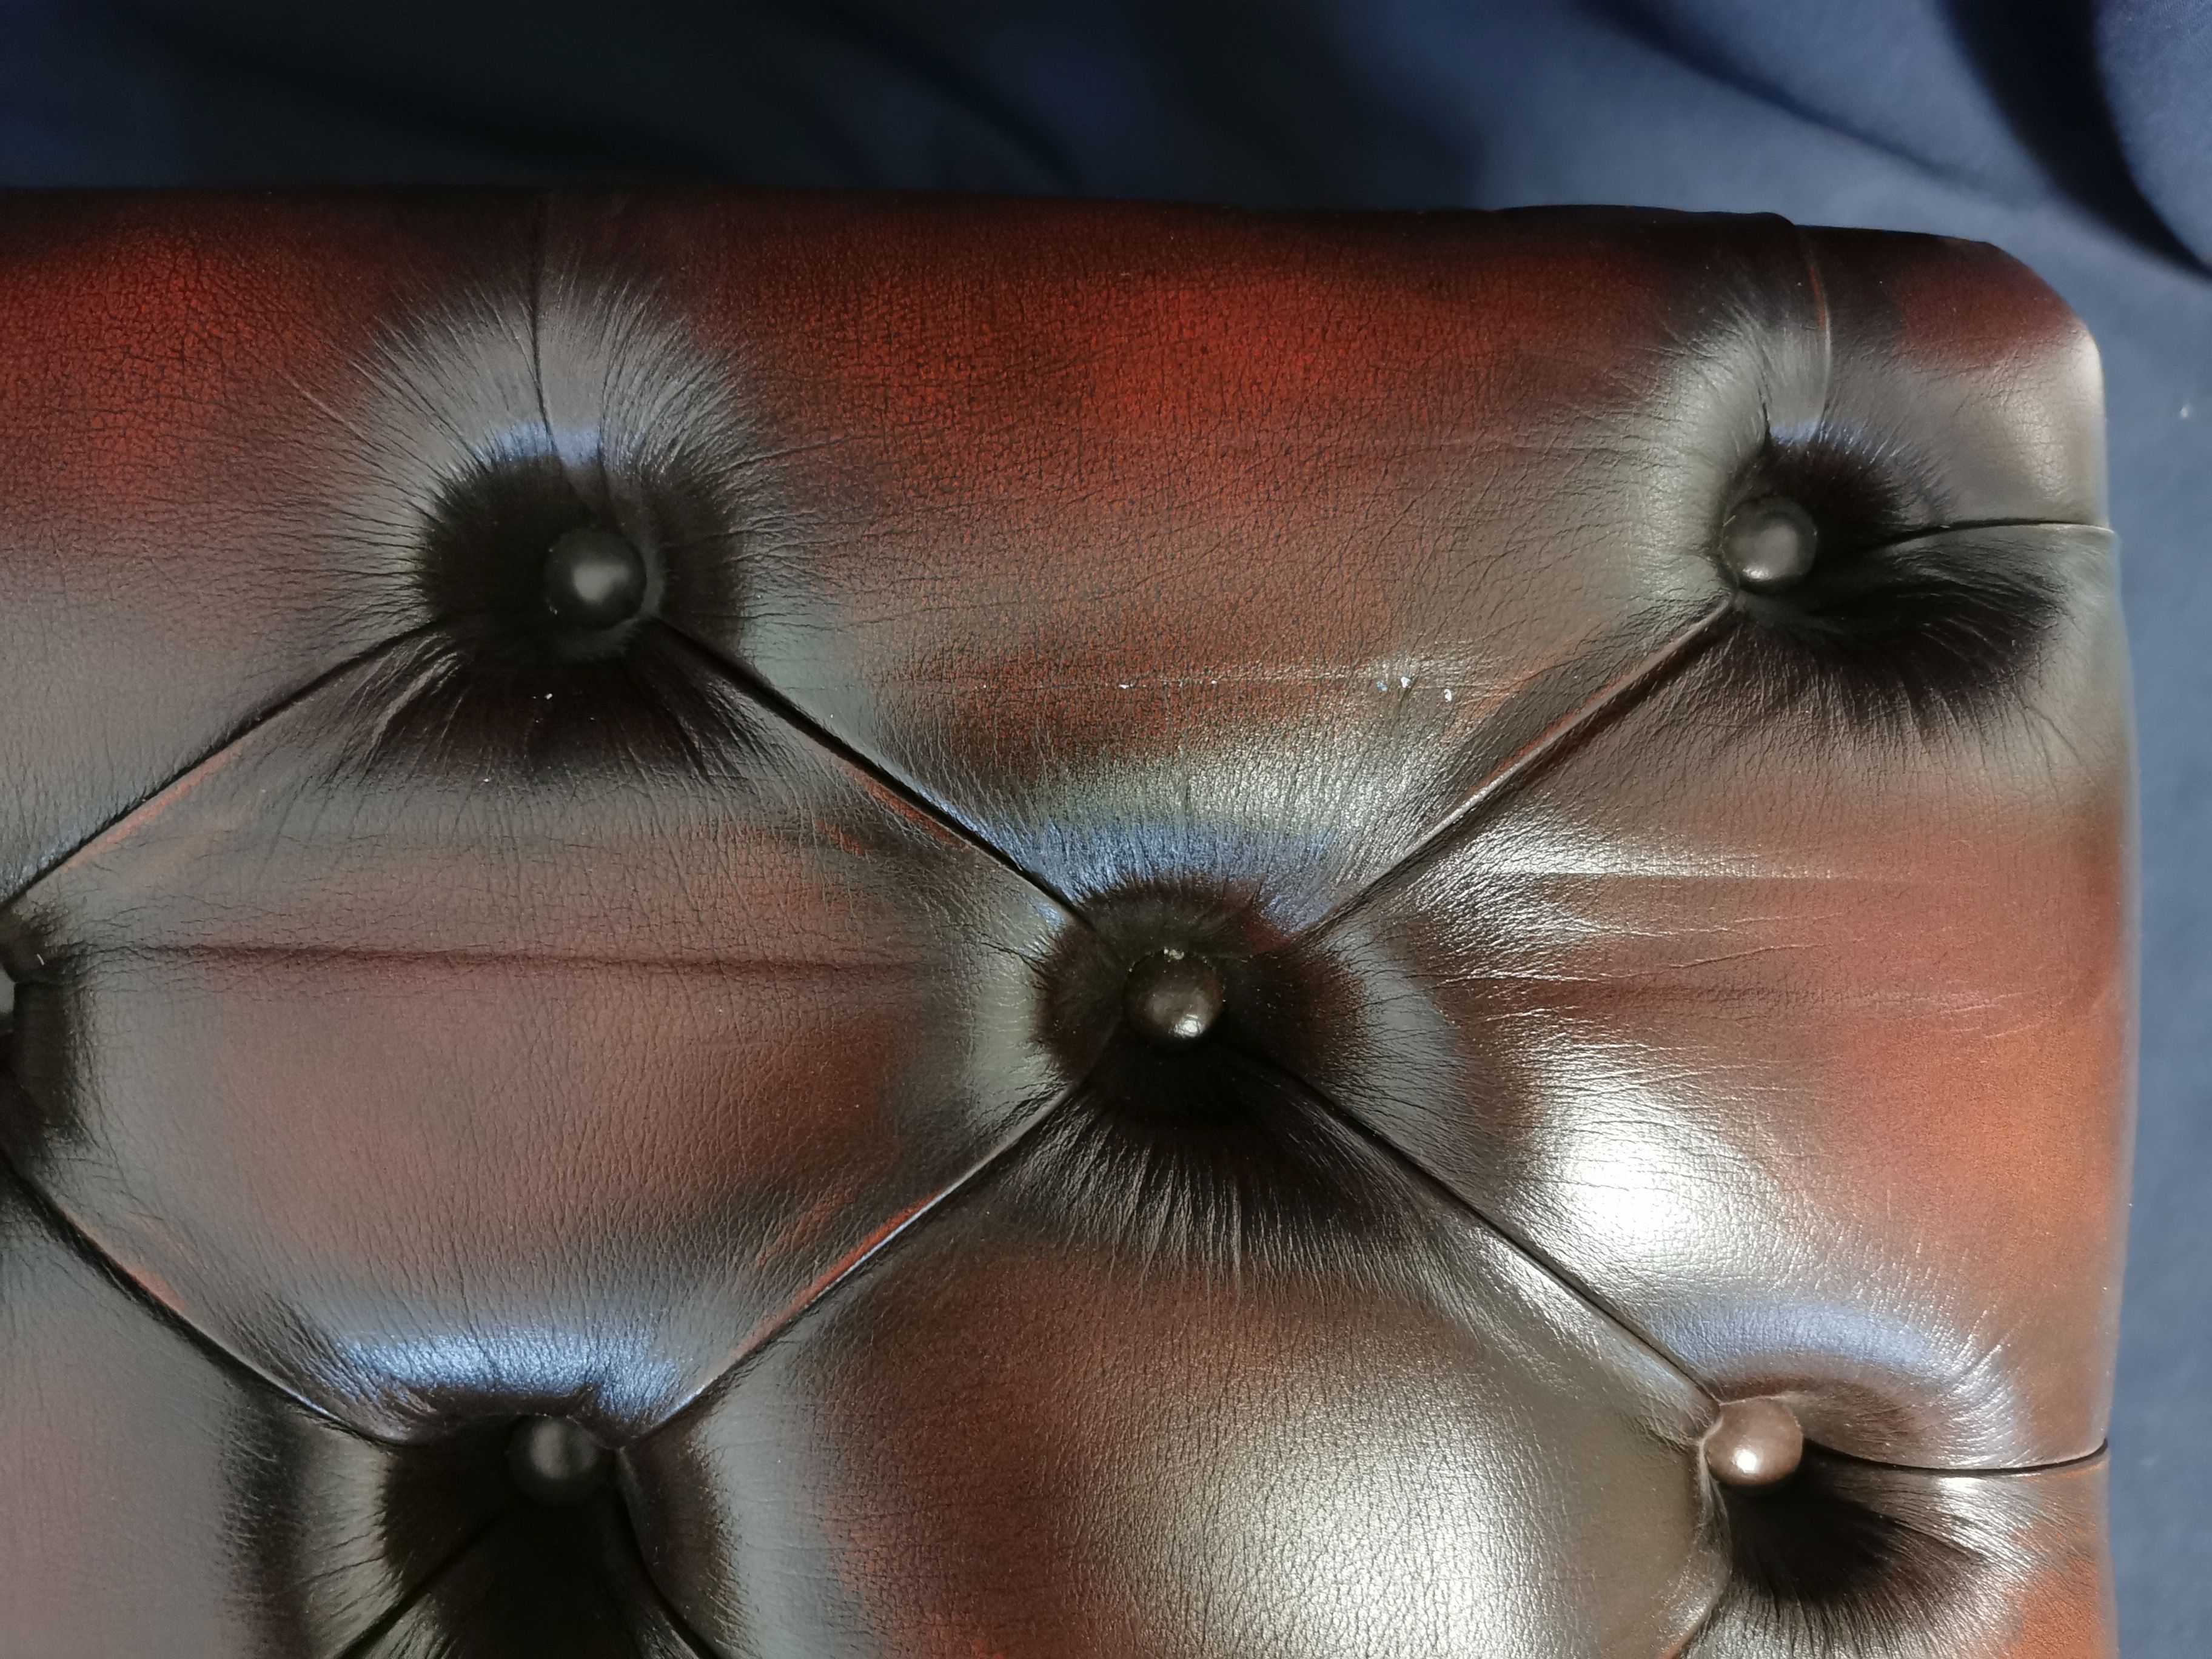 CHESTERFIELD FOOTSTOOL - Image 3 of 3